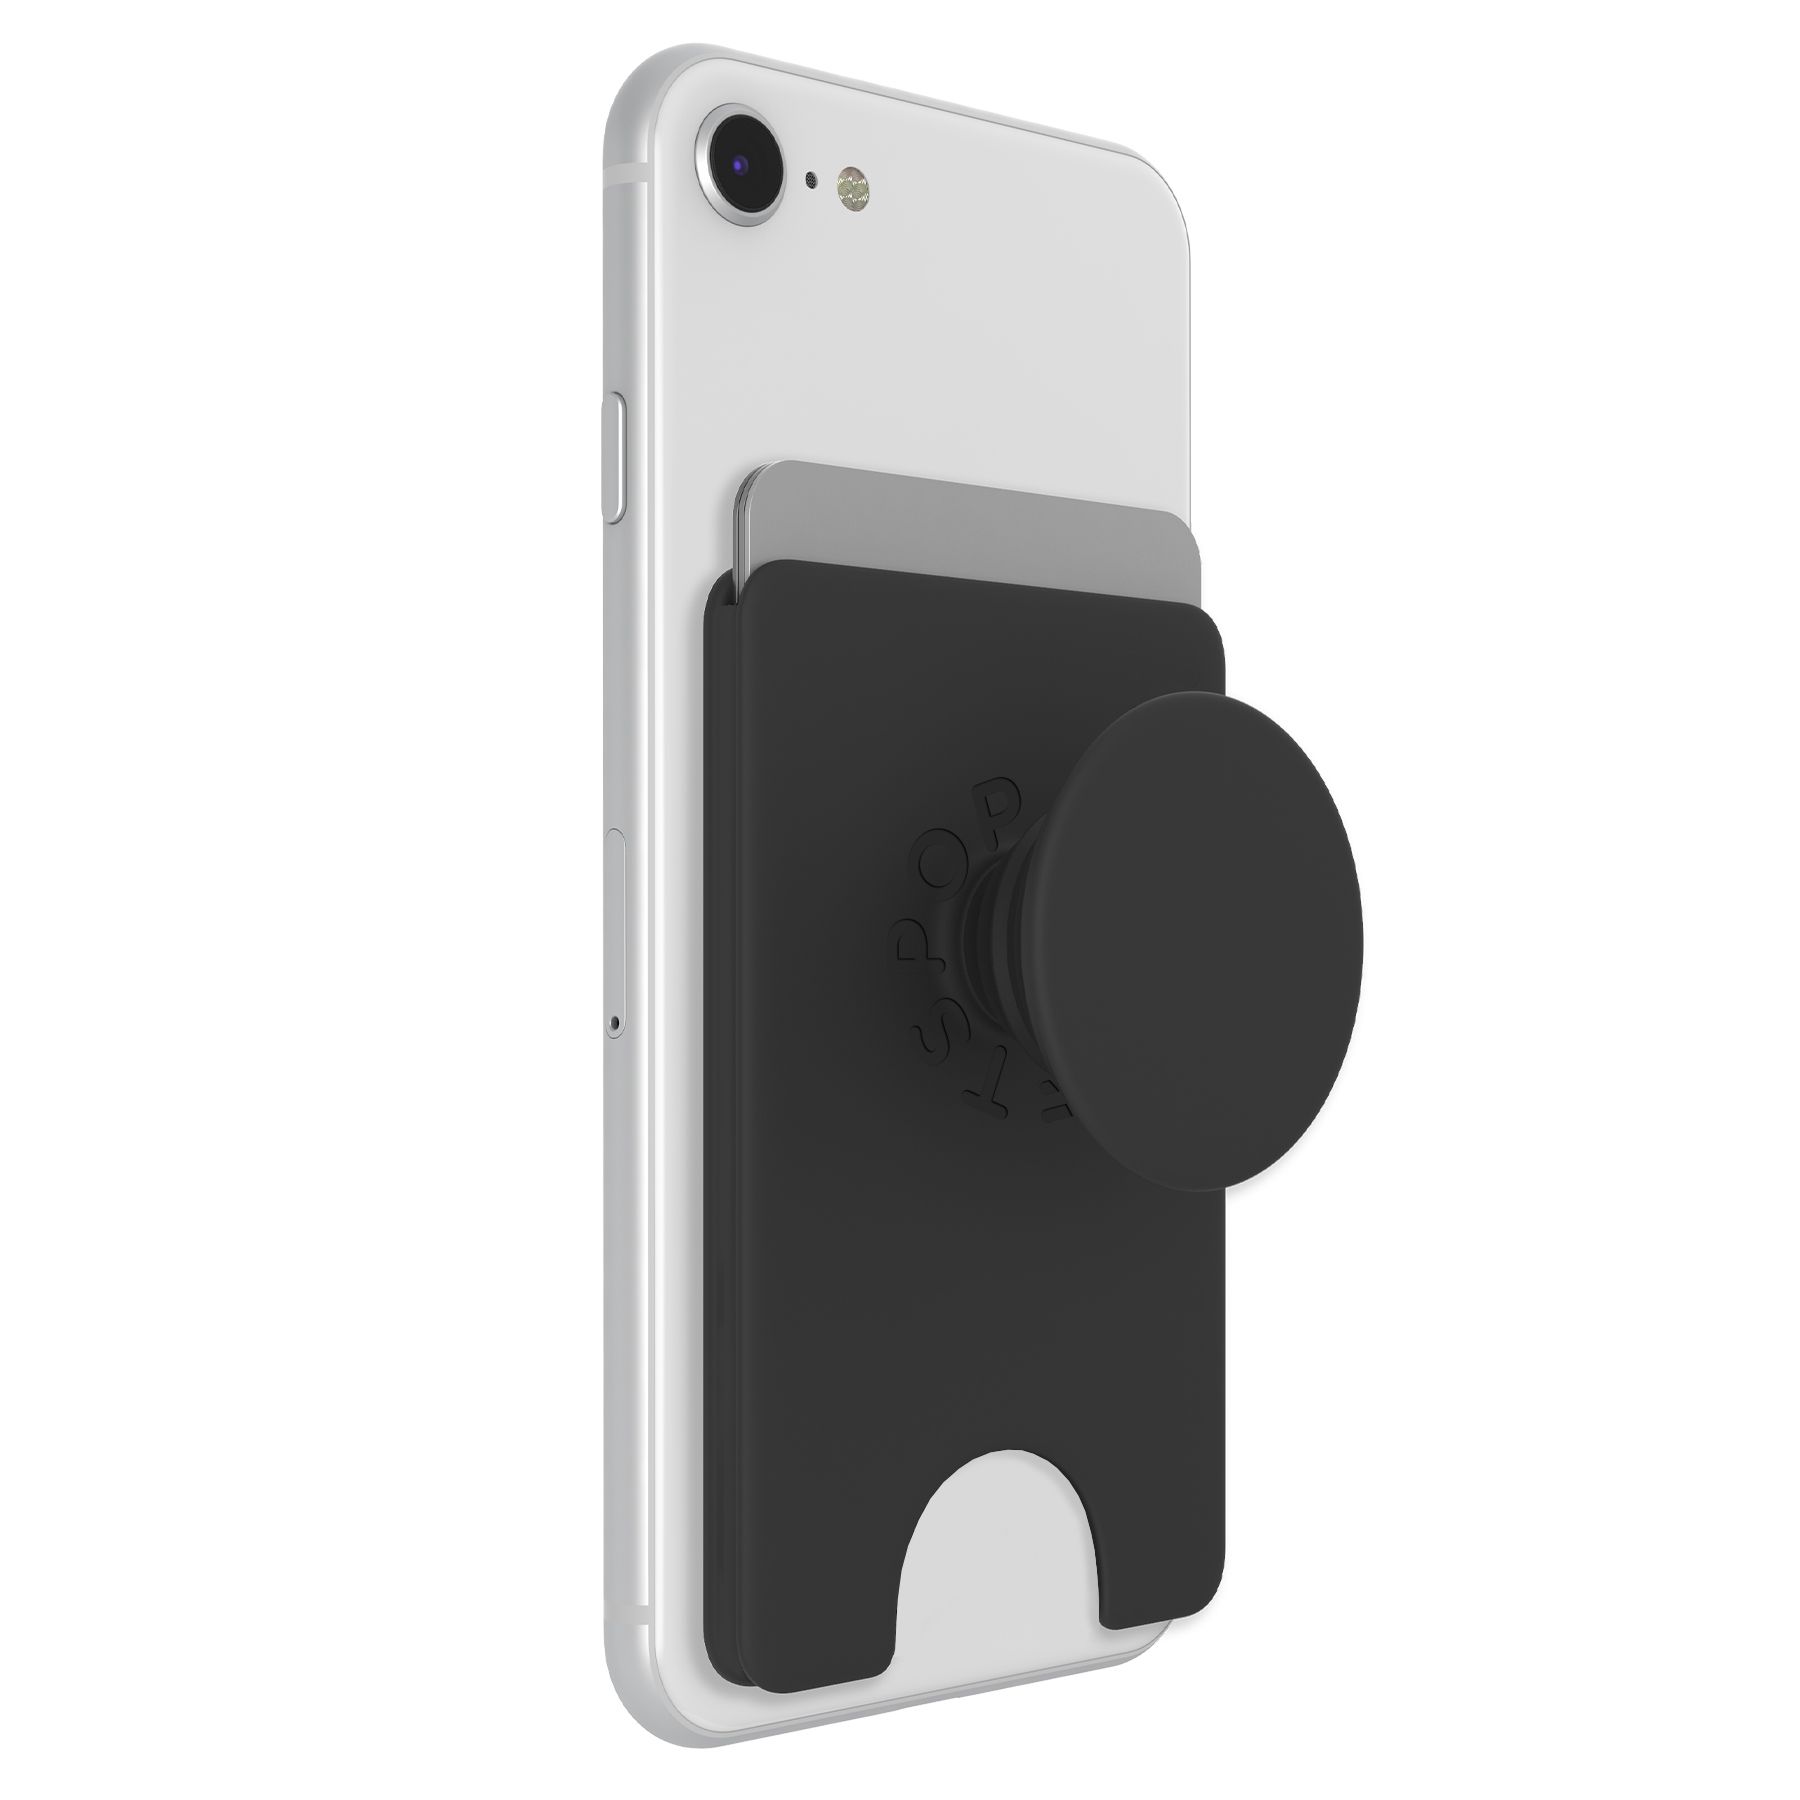 black rectangular object with round button and card adhered to a white phone